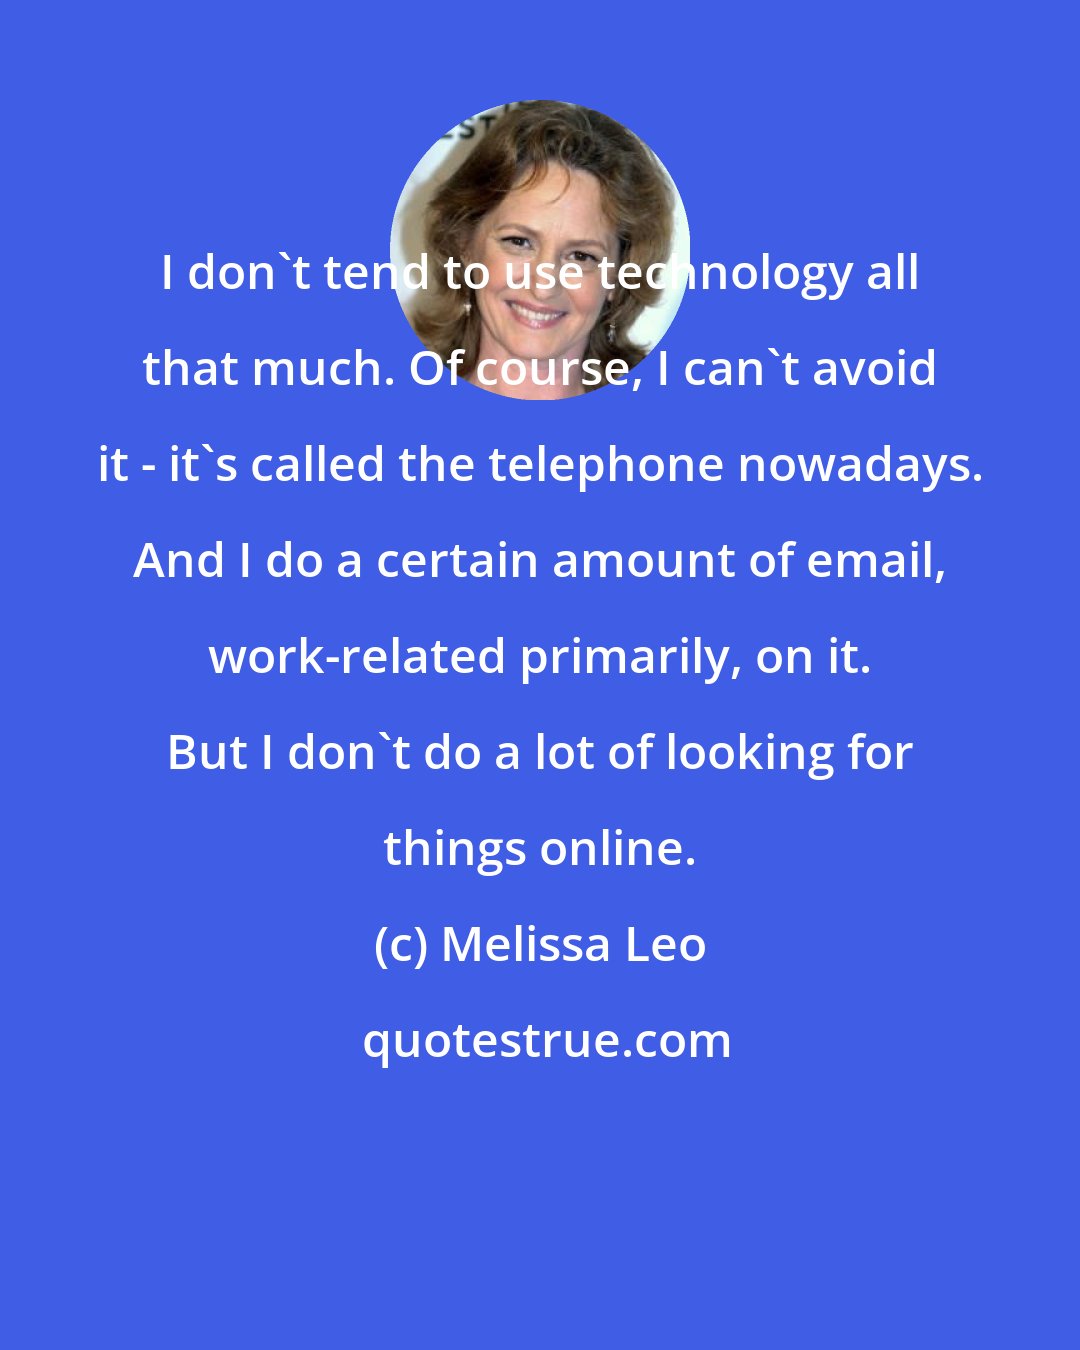 Melissa Leo: I don't tend to use technology all that much. Of course, I can't avoid it - it's called the telephone nowadays. And I do a certain amount of email, work-related primarily, on it. But I don't do a lot of looking for things online.